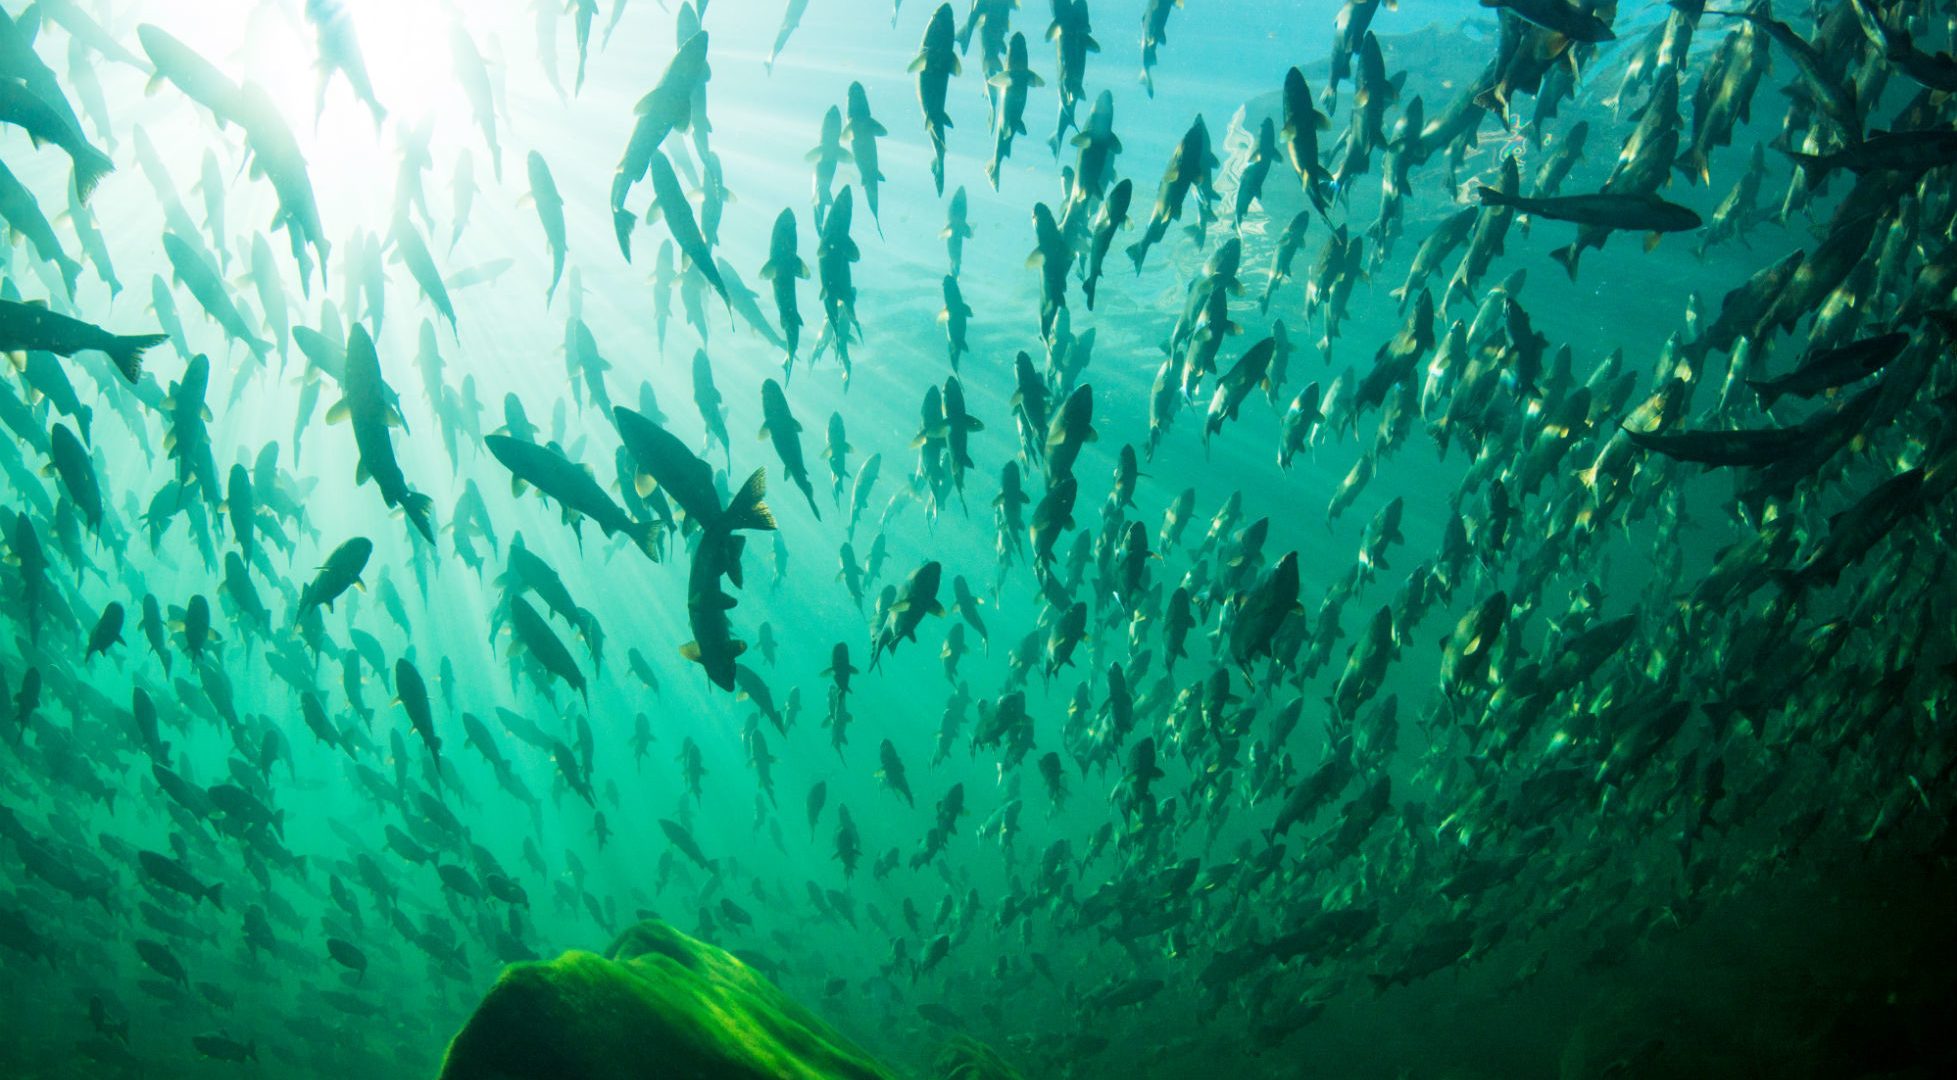 Underwater picture of a shoal of pink salmon. Photo: April Bencze